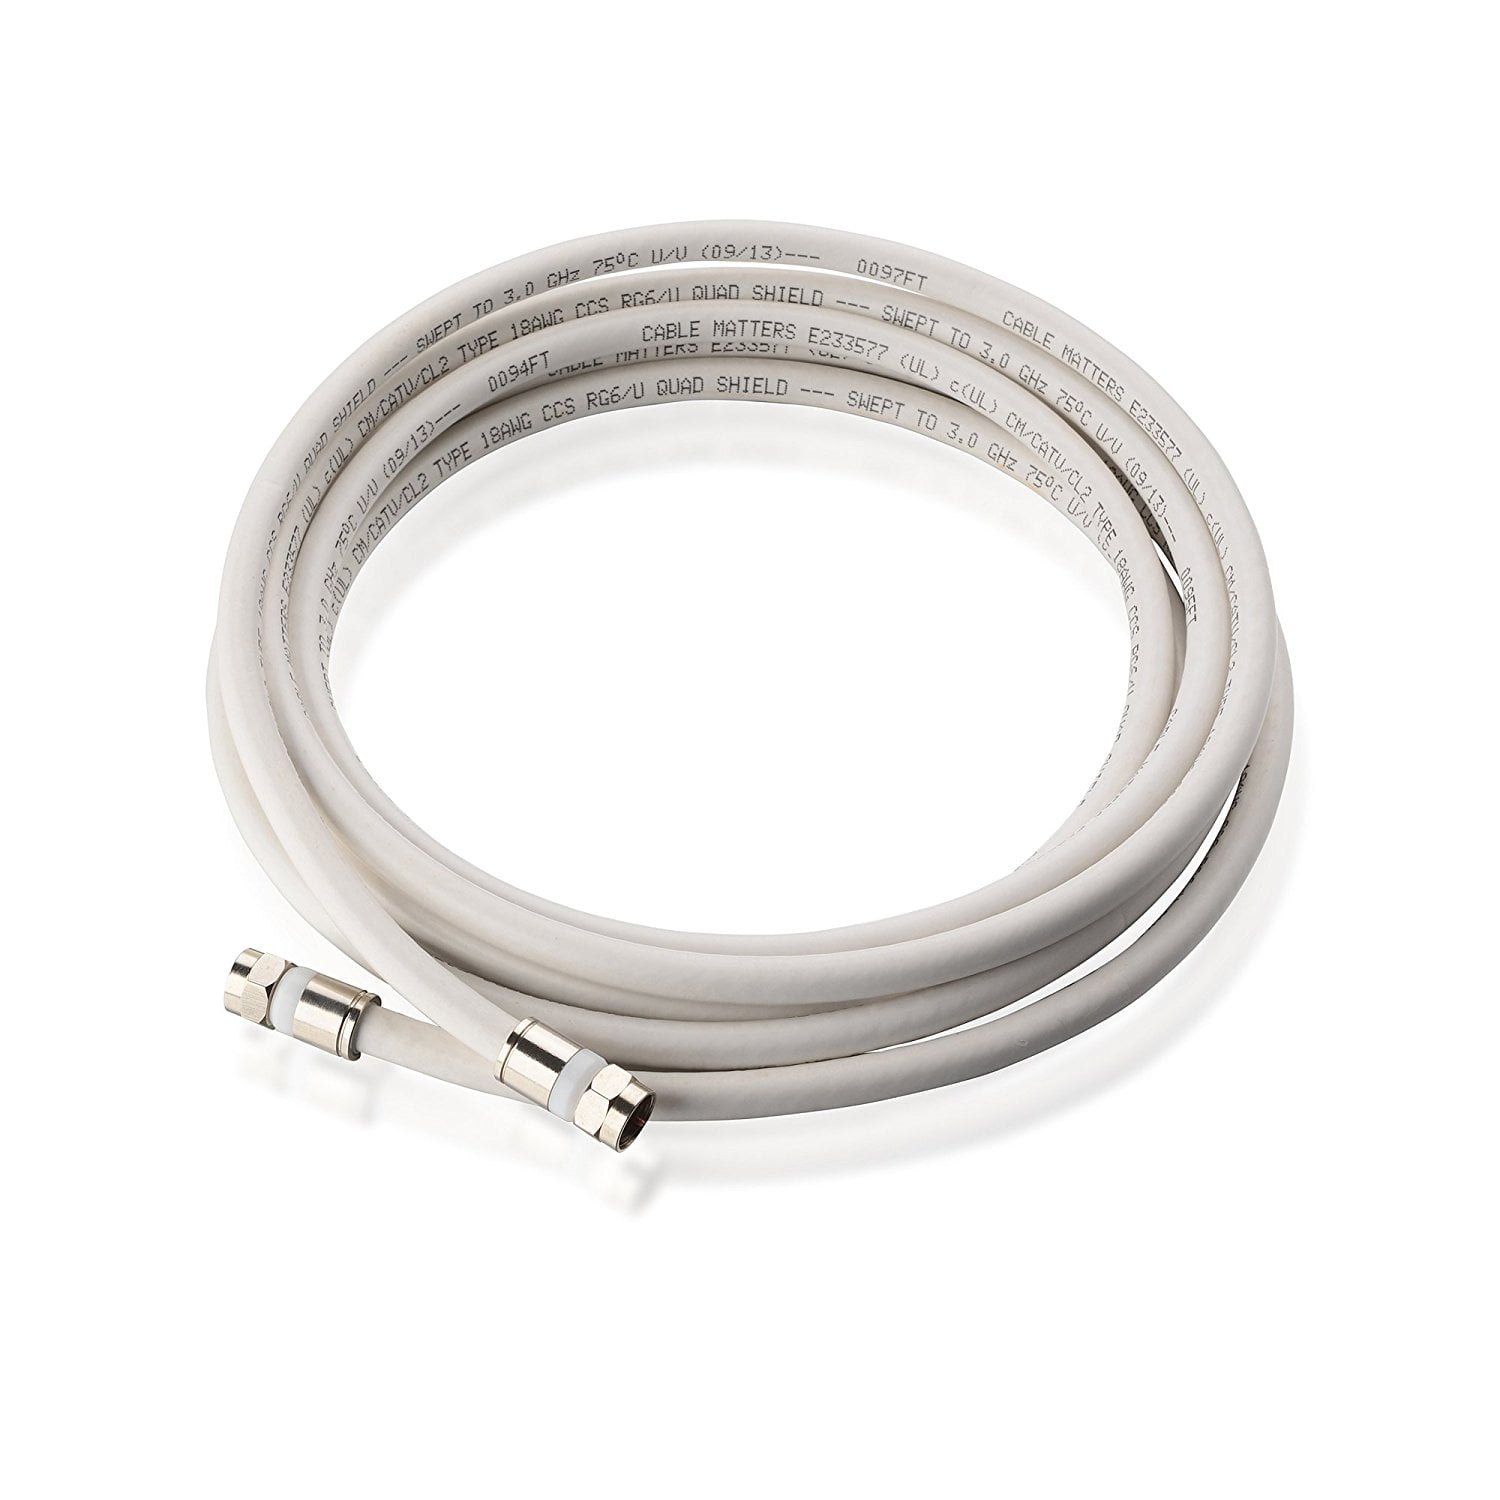 Cable Matters 3-Pack CL2 In-Wall Rated (CM) Quad Shielded Coaxial Cable (RG6  Cable Coax Cable) in White 10 Feet Available 1.5FT 100FT in Length 